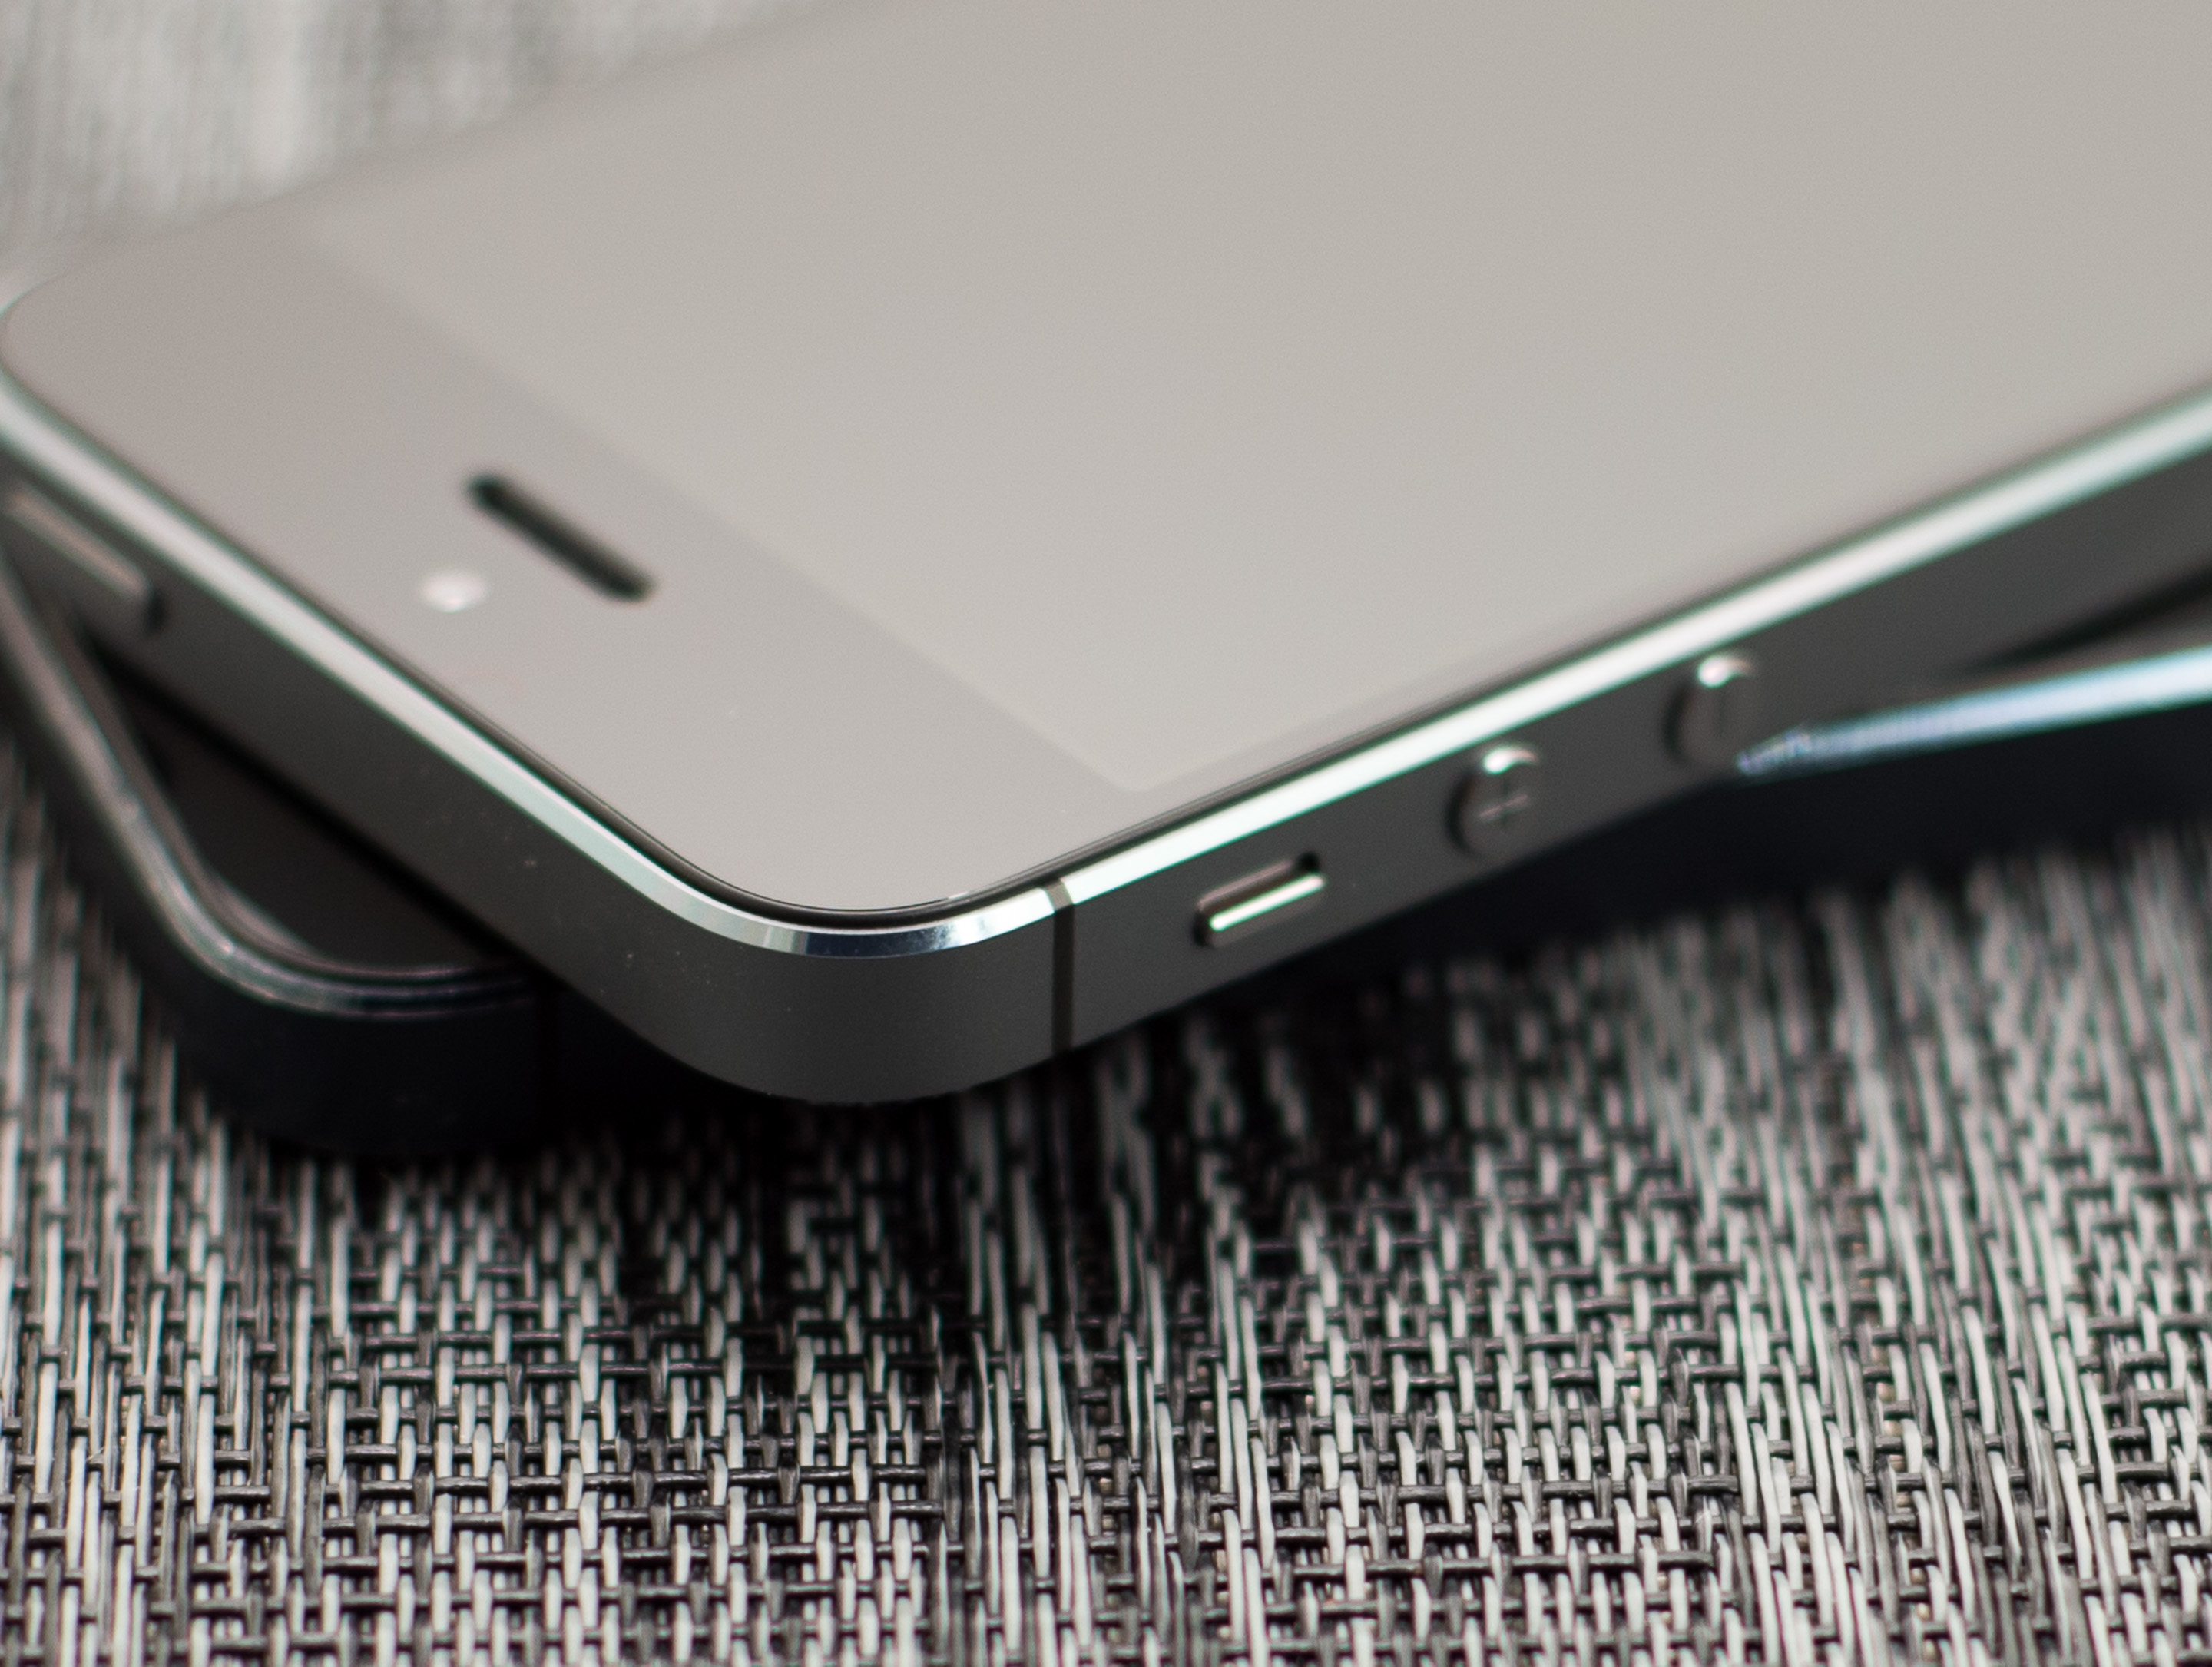 The iPhone 5s Review